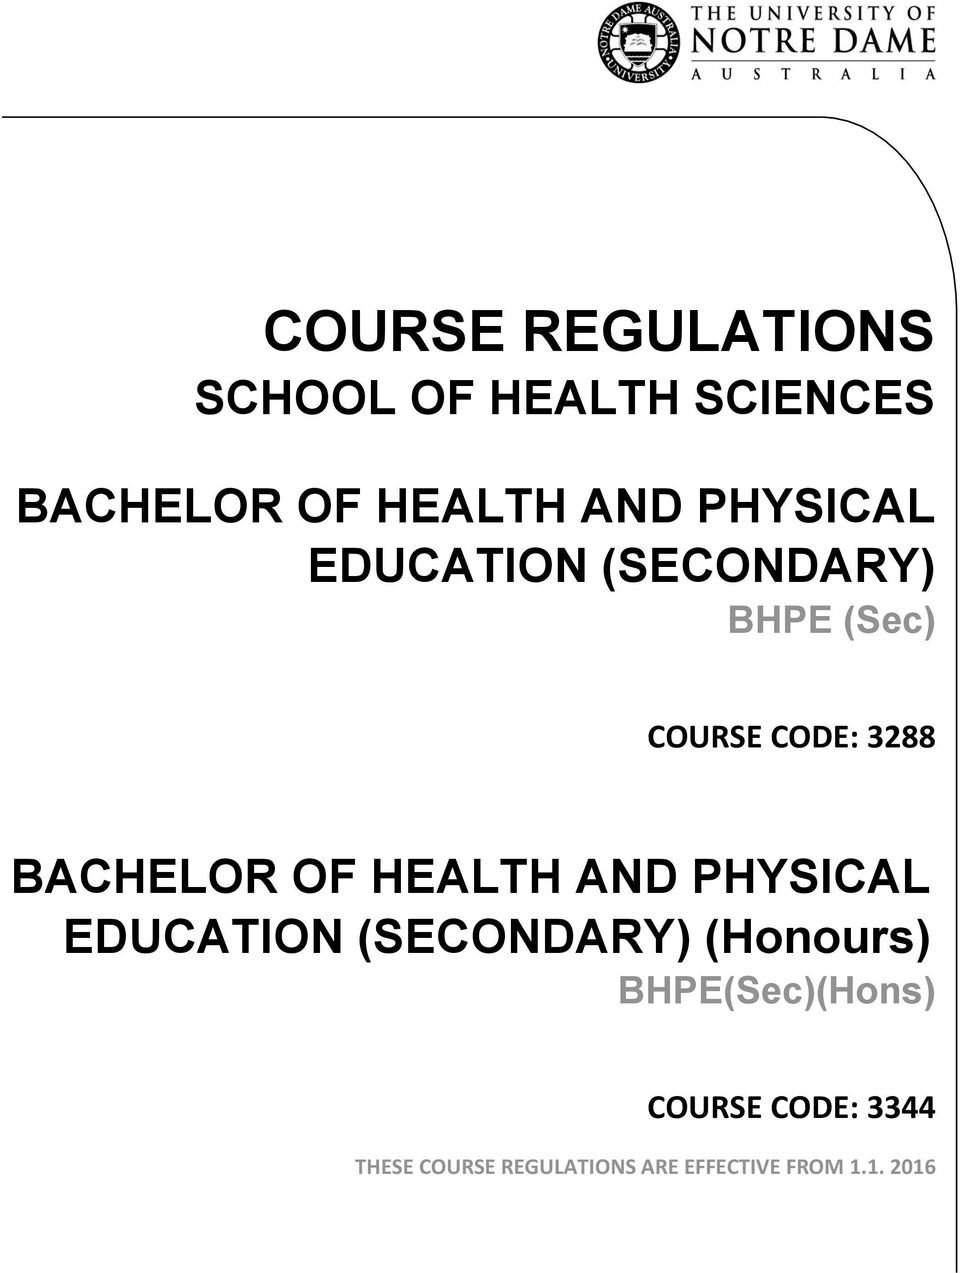 OF HEALTH AND PHYSICAL EDUCATION (SECONDARY) (Honours)